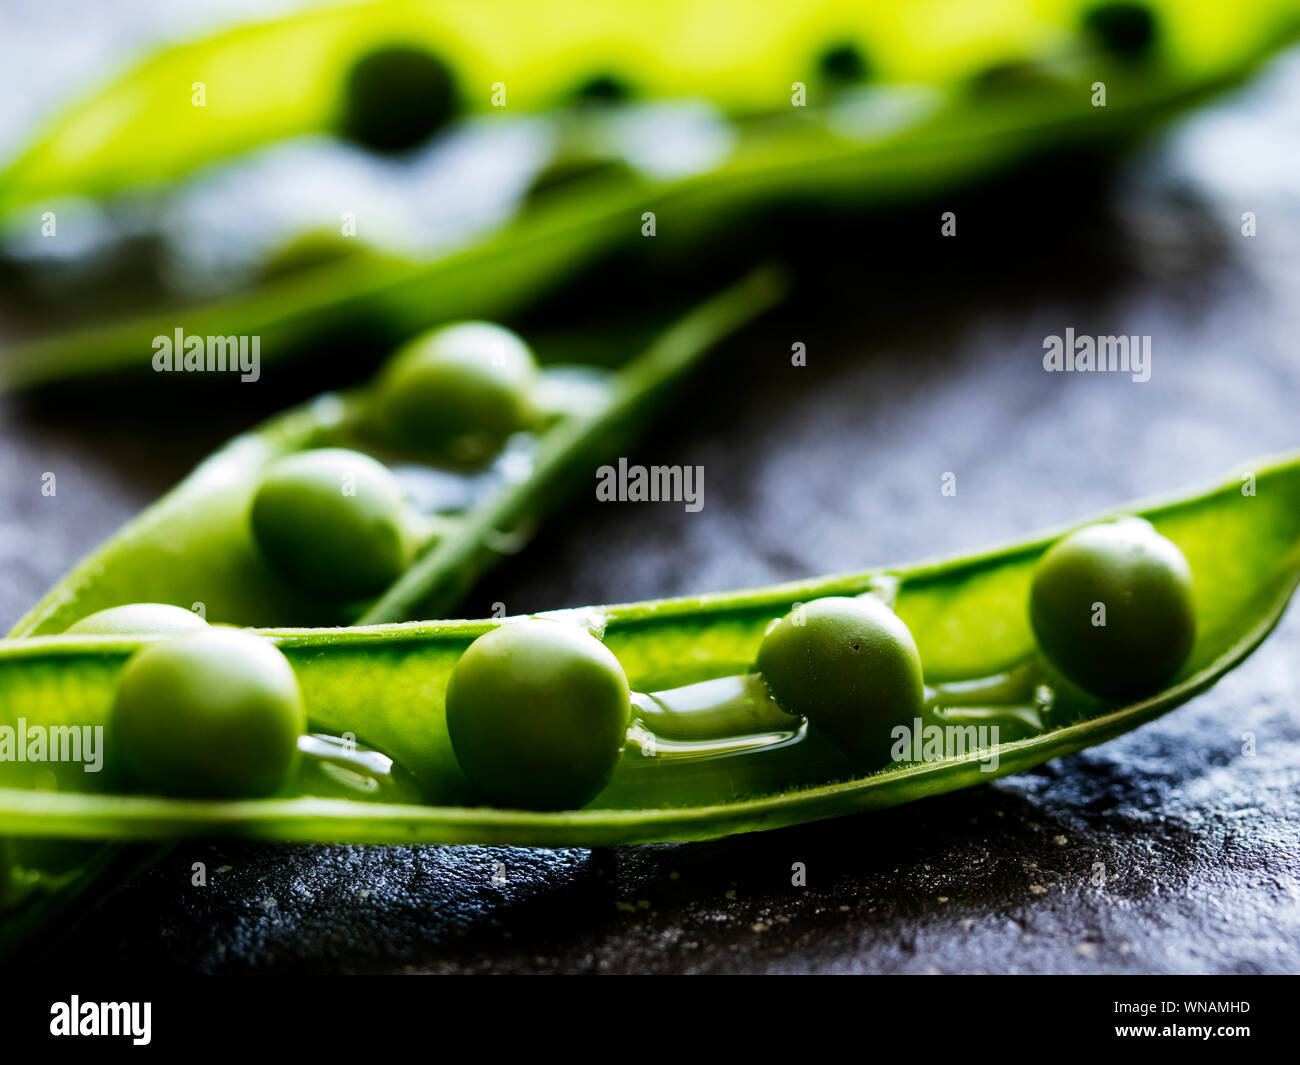 Close-up Of Green Peas On Table Stock Photo